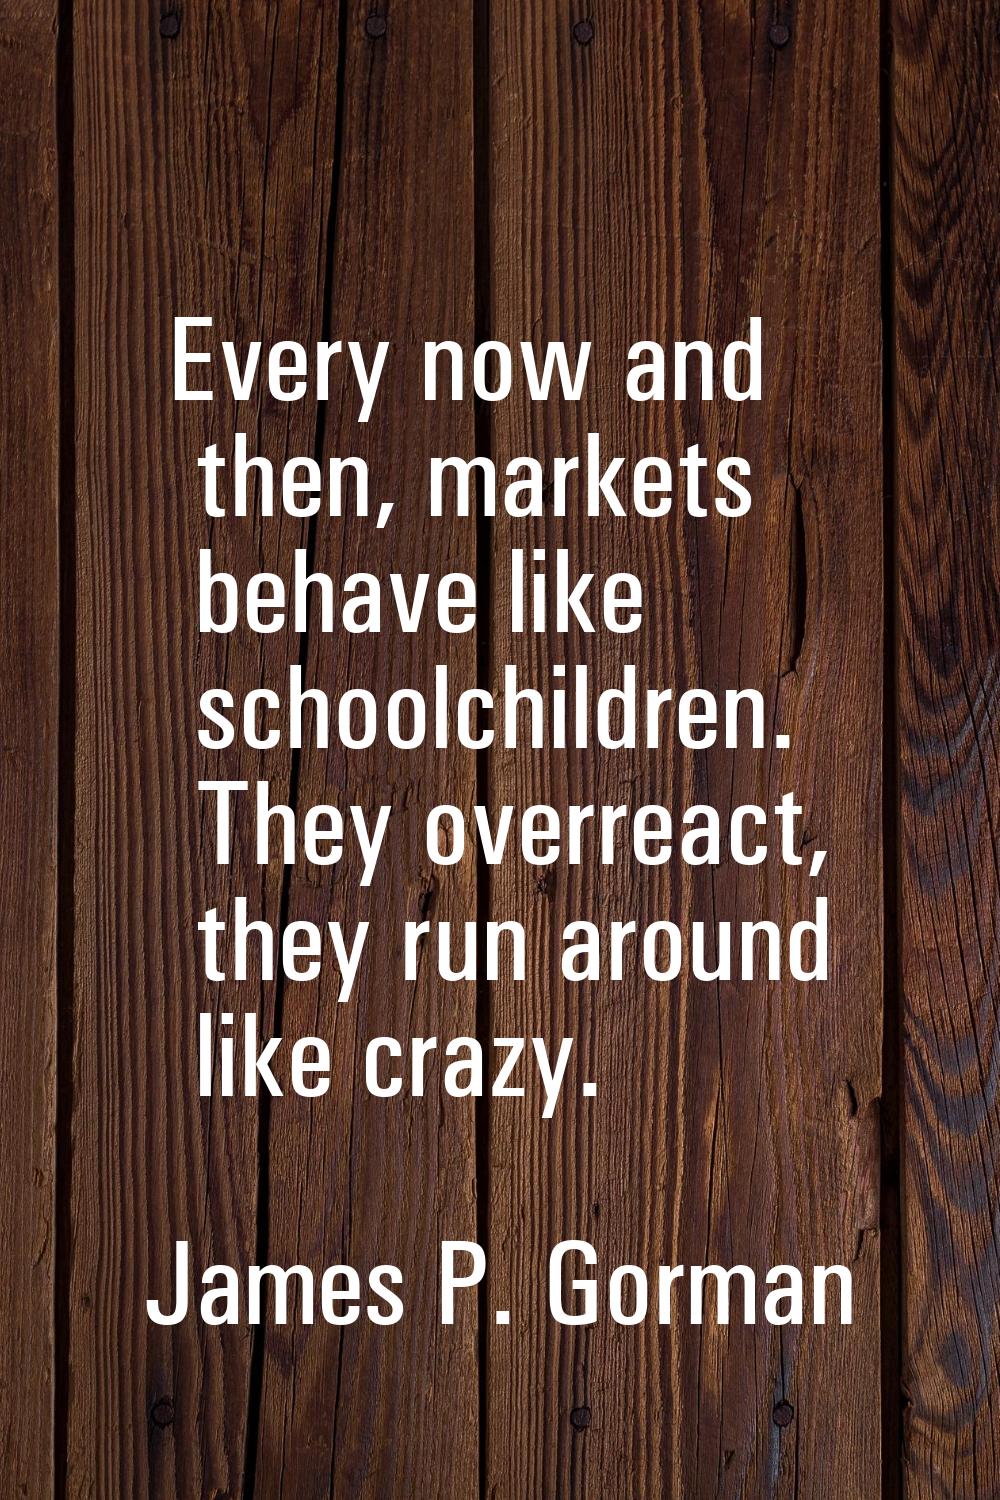 Every now and then, markets behave like schoolchildren. They overreact, they run around like crazy.